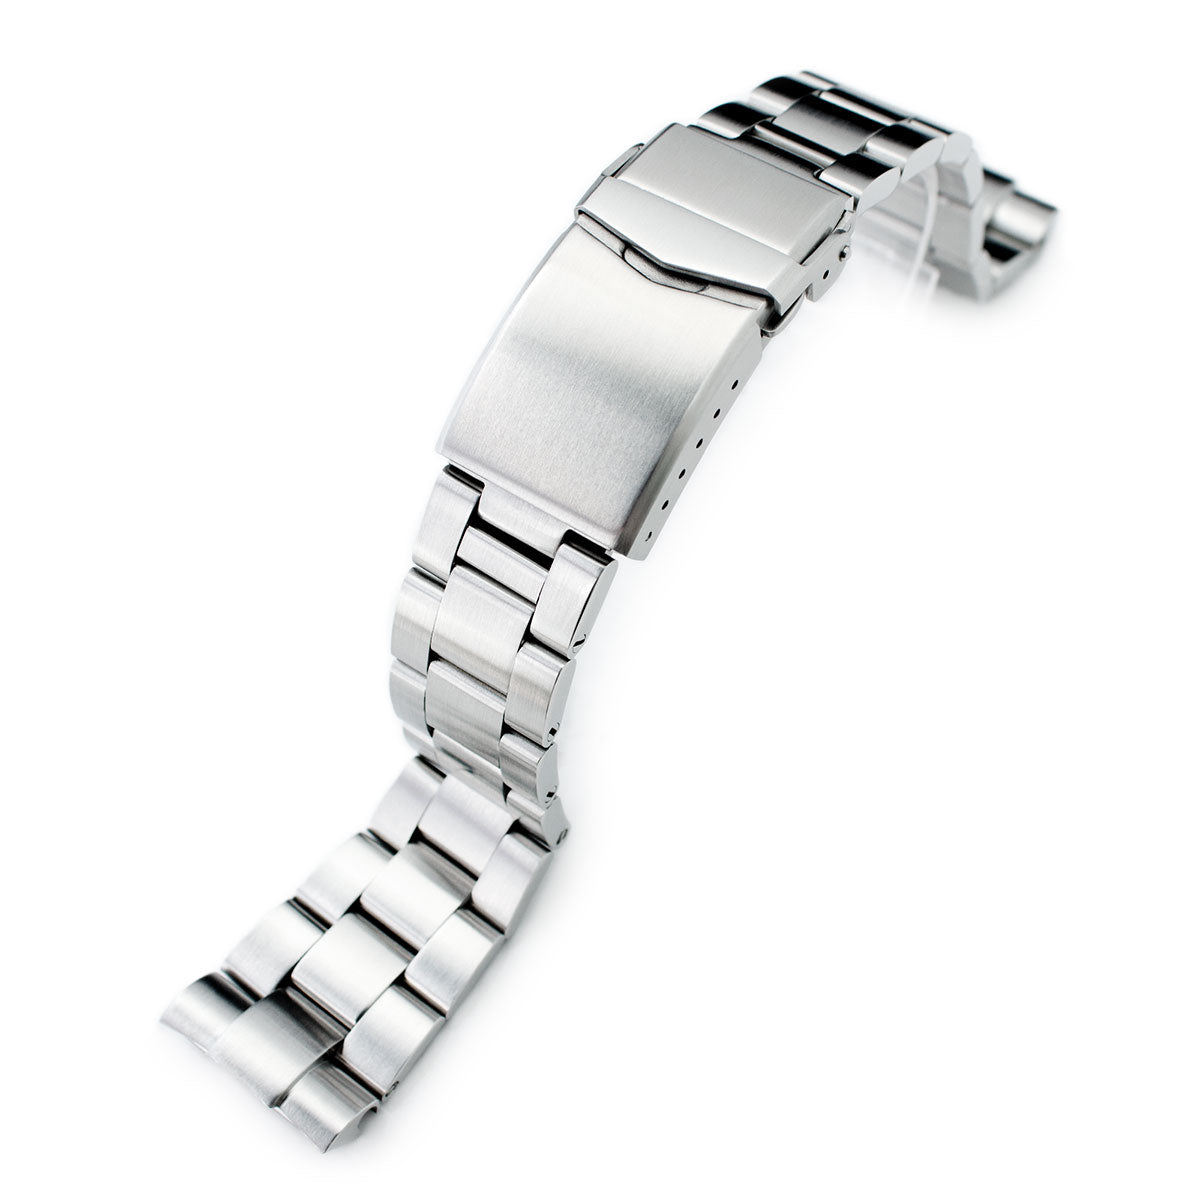 Seiko SRP Curved End Replacement Watch Bracelet for Turtle re